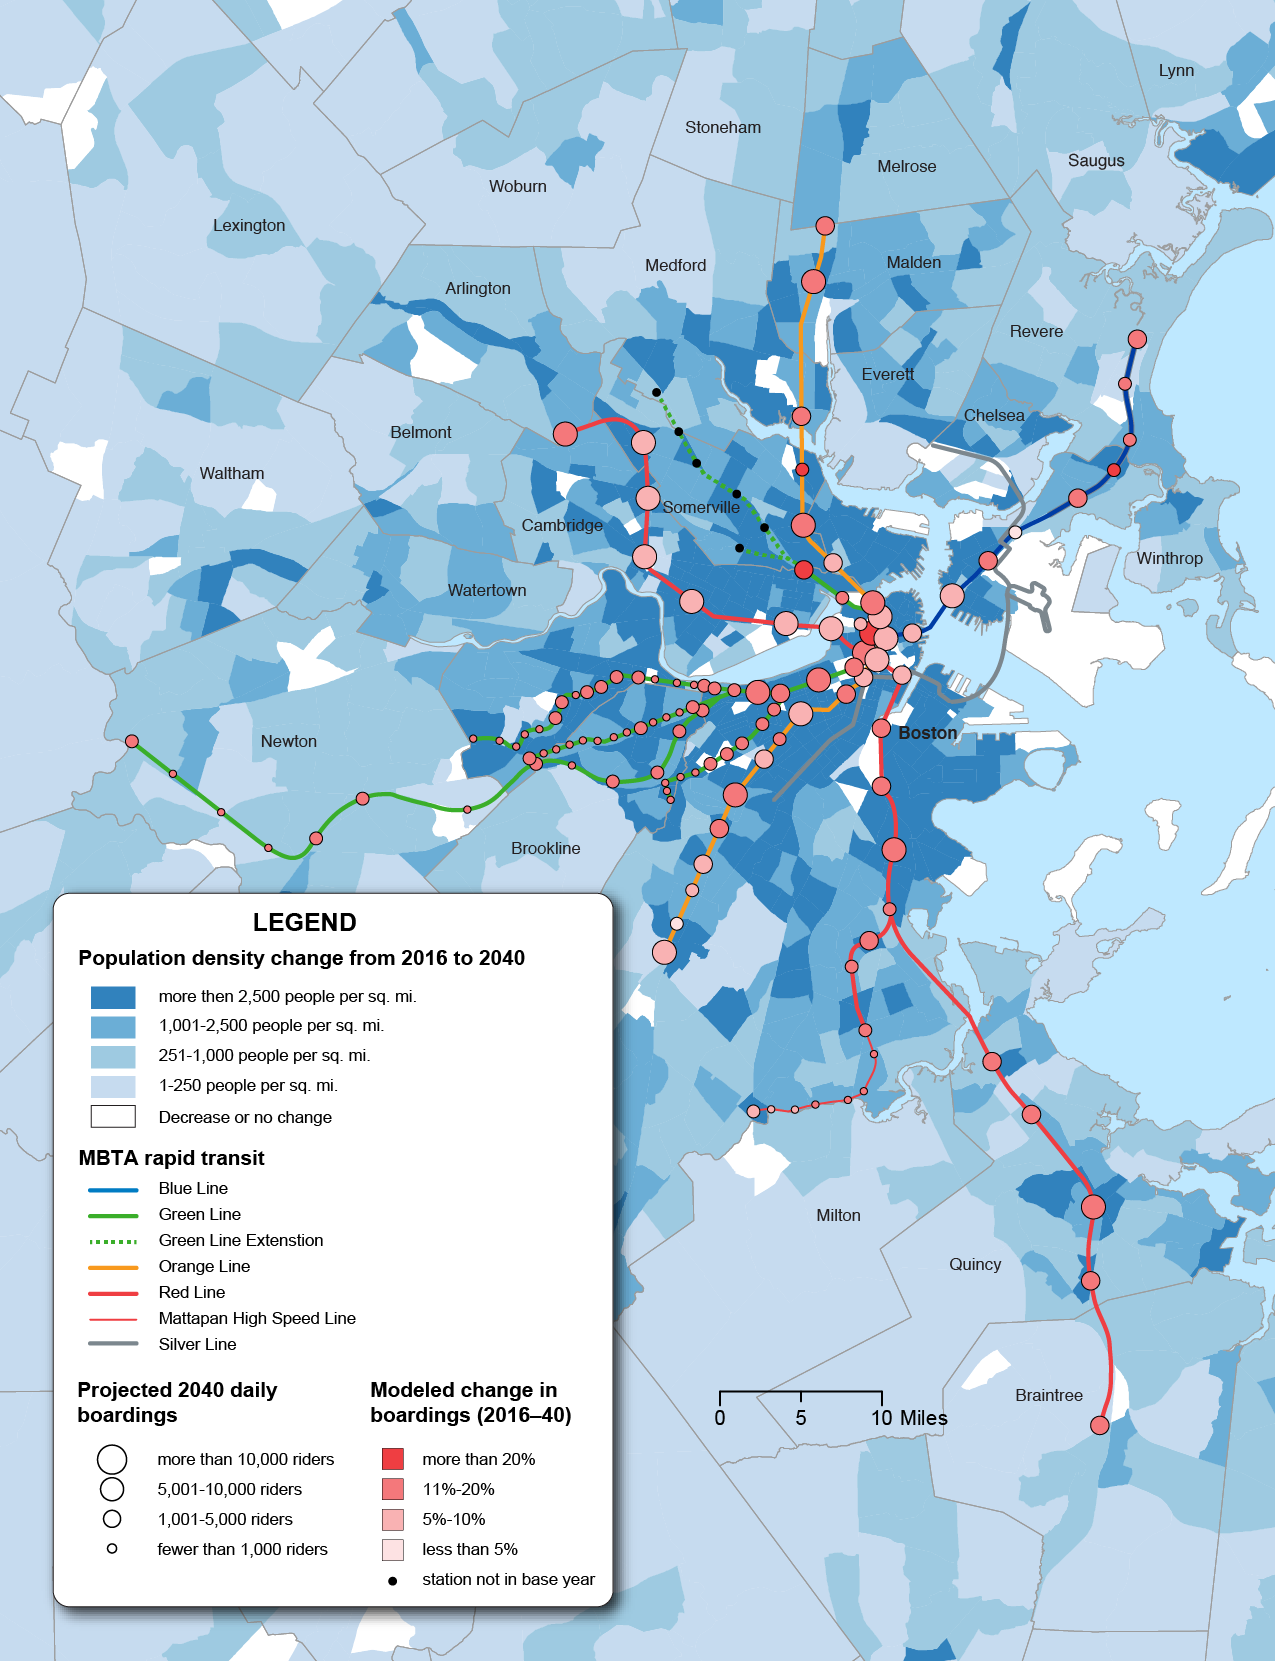 Figure 6-9 is a map of the Boston Region with MBTA Rapid Transit Lines overlaid with population density. Figure 6-9 also includes points reflecting the modeled change in boardings from 2016-2040 and Projected 2040 daily boardings. 